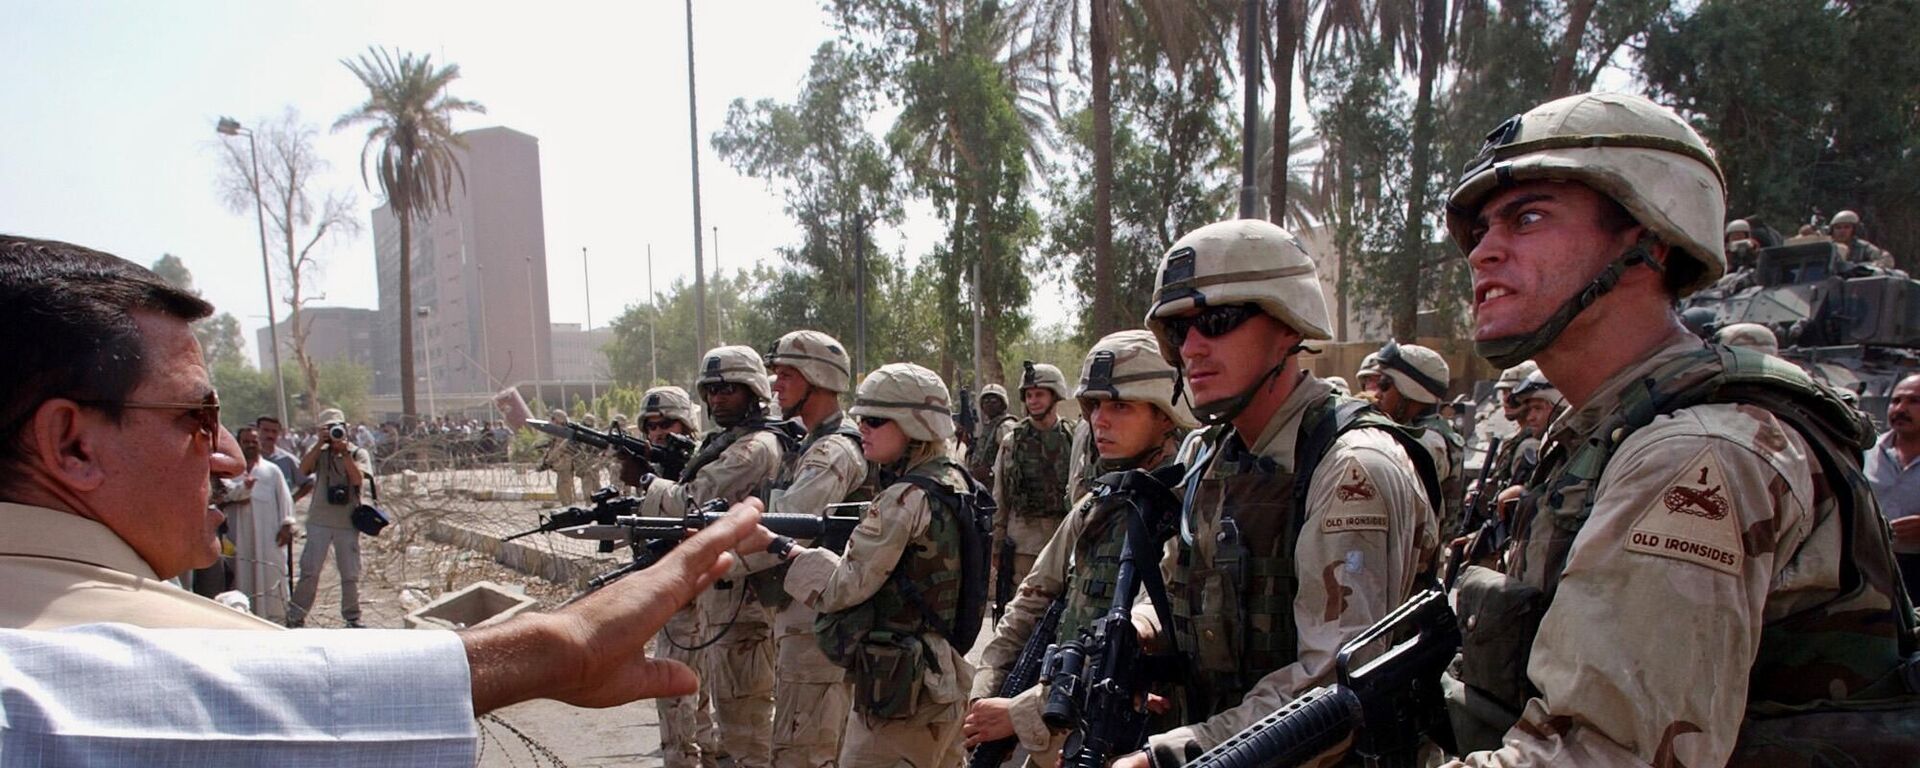  In this June 18, 2003 file photo, U.S. soldiers prevent former Iraqi soldiers from trying to enter the American headquarters during a deadly demonstration in Baghdad, Iraq.  - Sputnik International, 1920, 21.03.2023